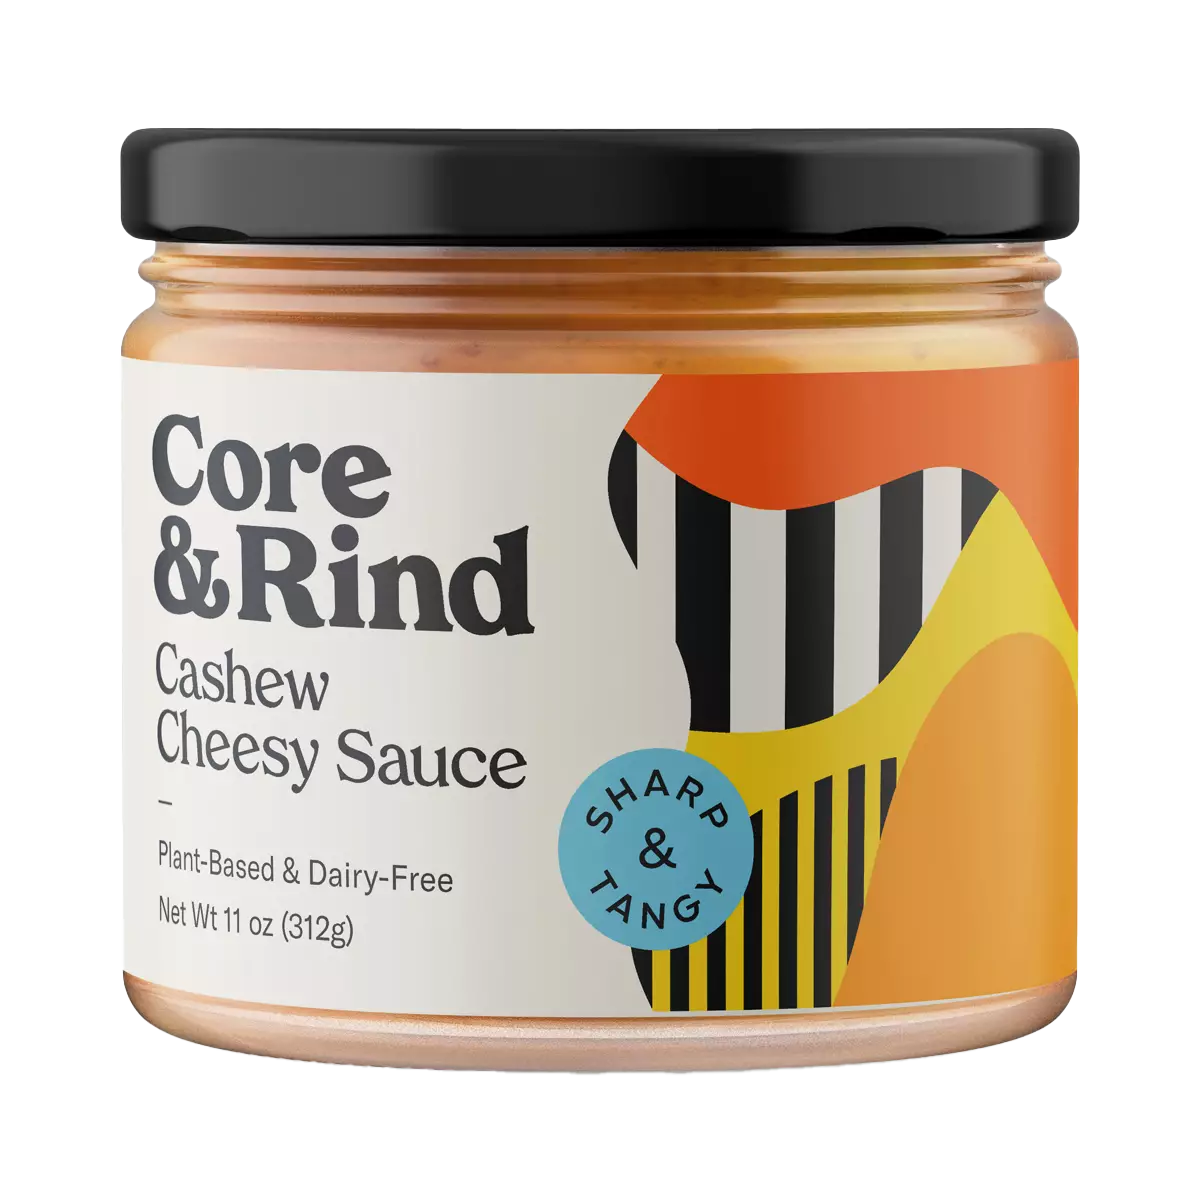 Core-Rind Cashew Cheesy Sauce- Sharp and Tangy